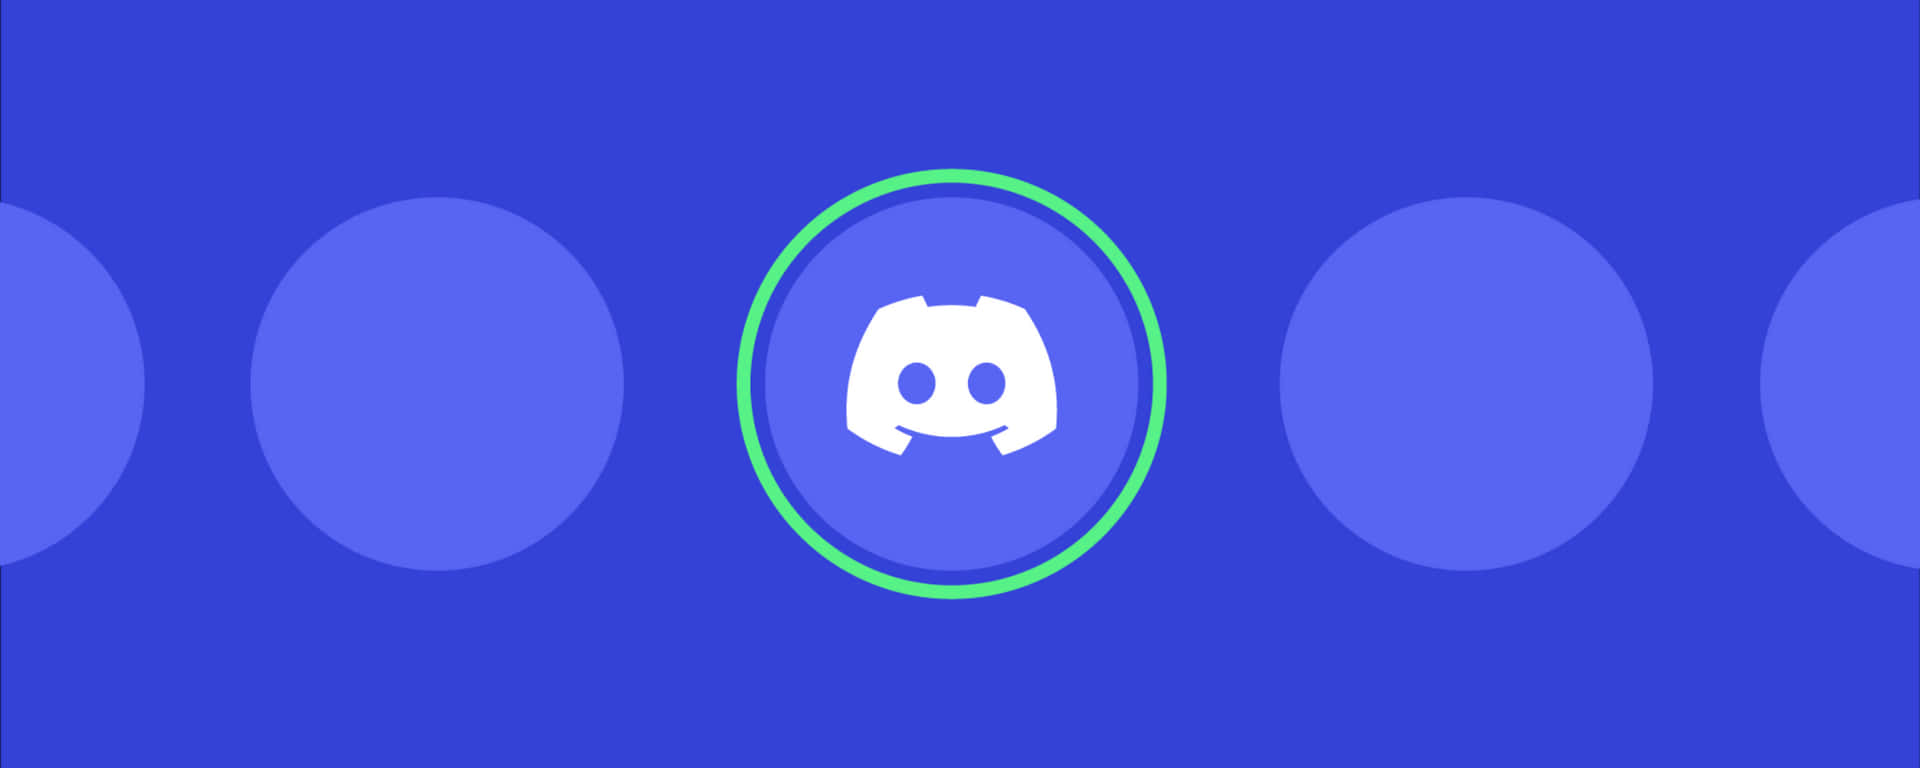 Harness the Power of Discord to Unite Your Community